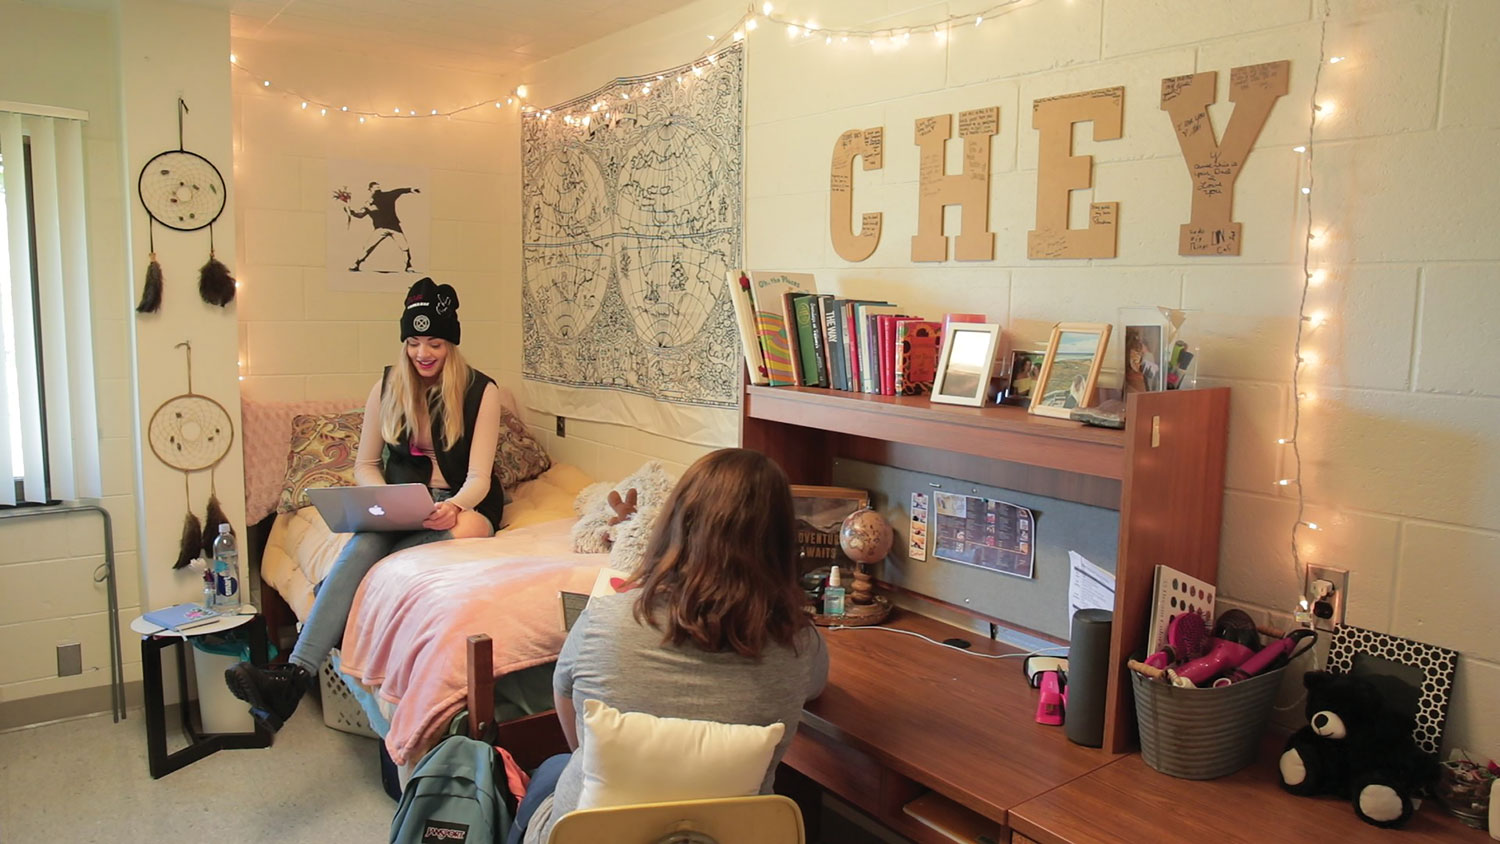 North Central students in their dorm room